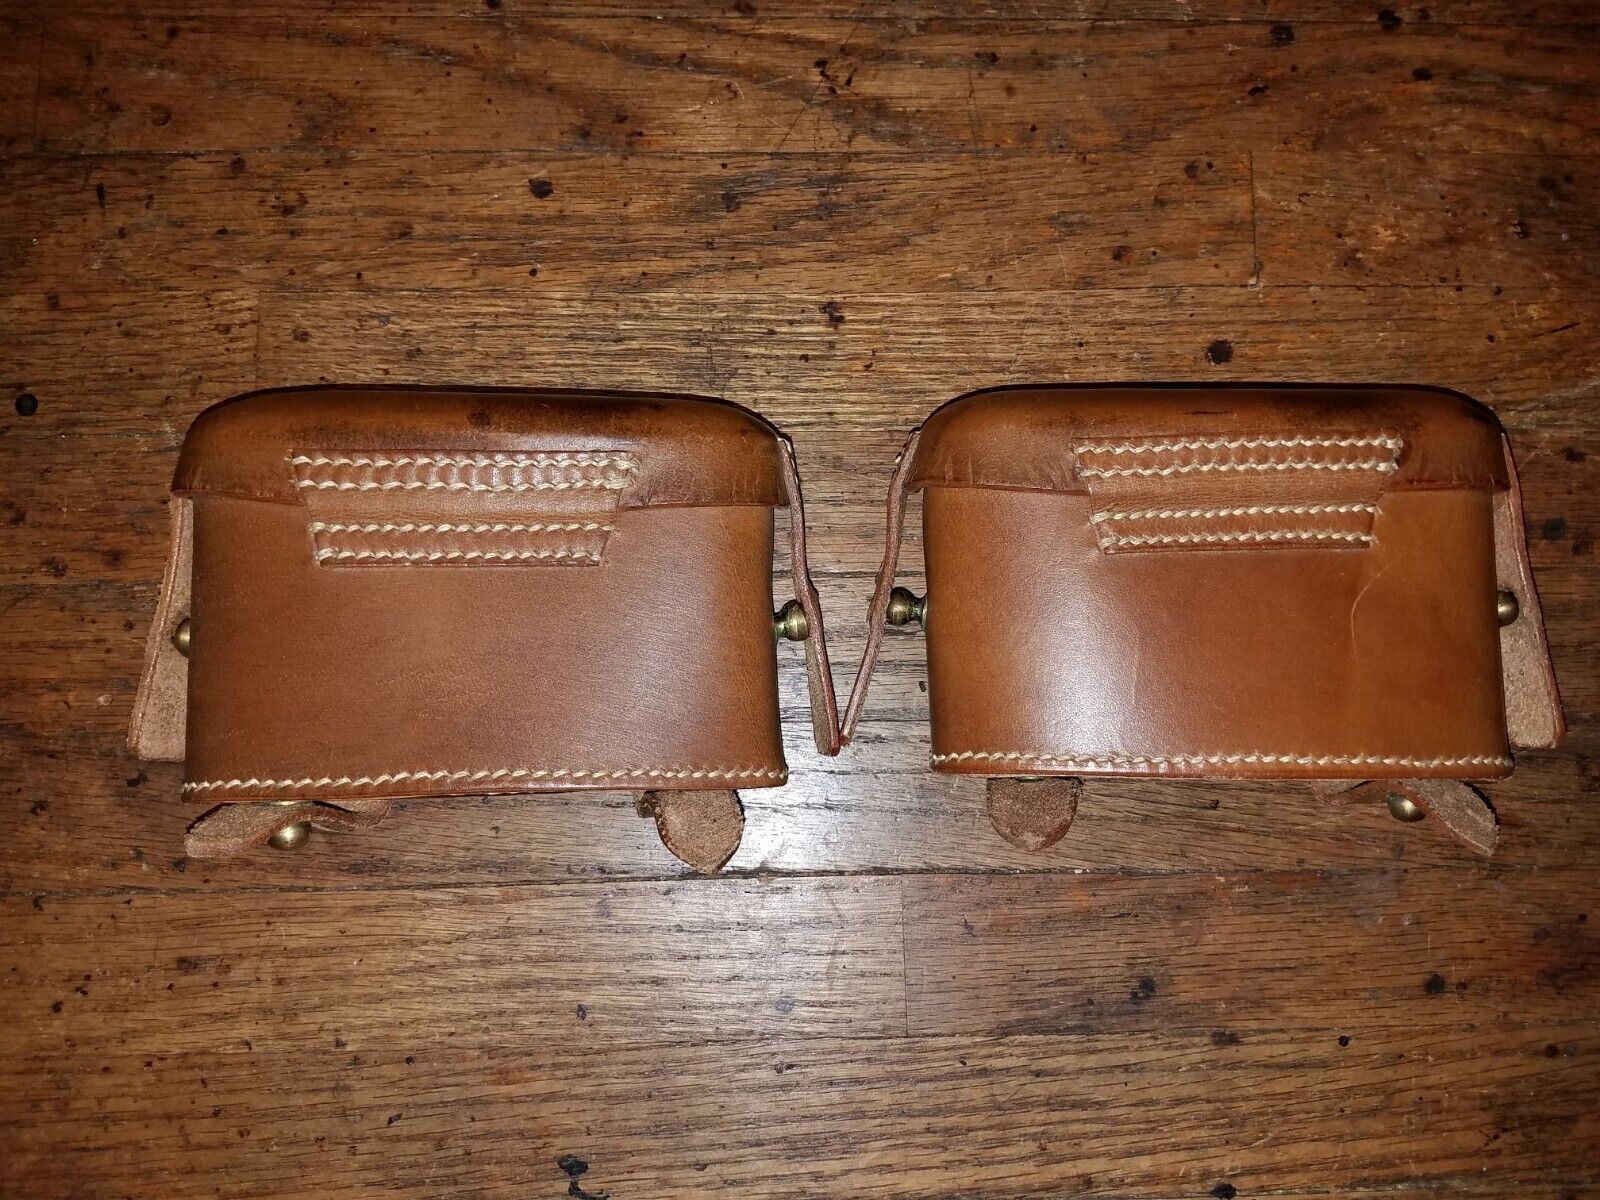 WW1 GERMAN ARMY Pioneer Cartridge Pouches (repro)